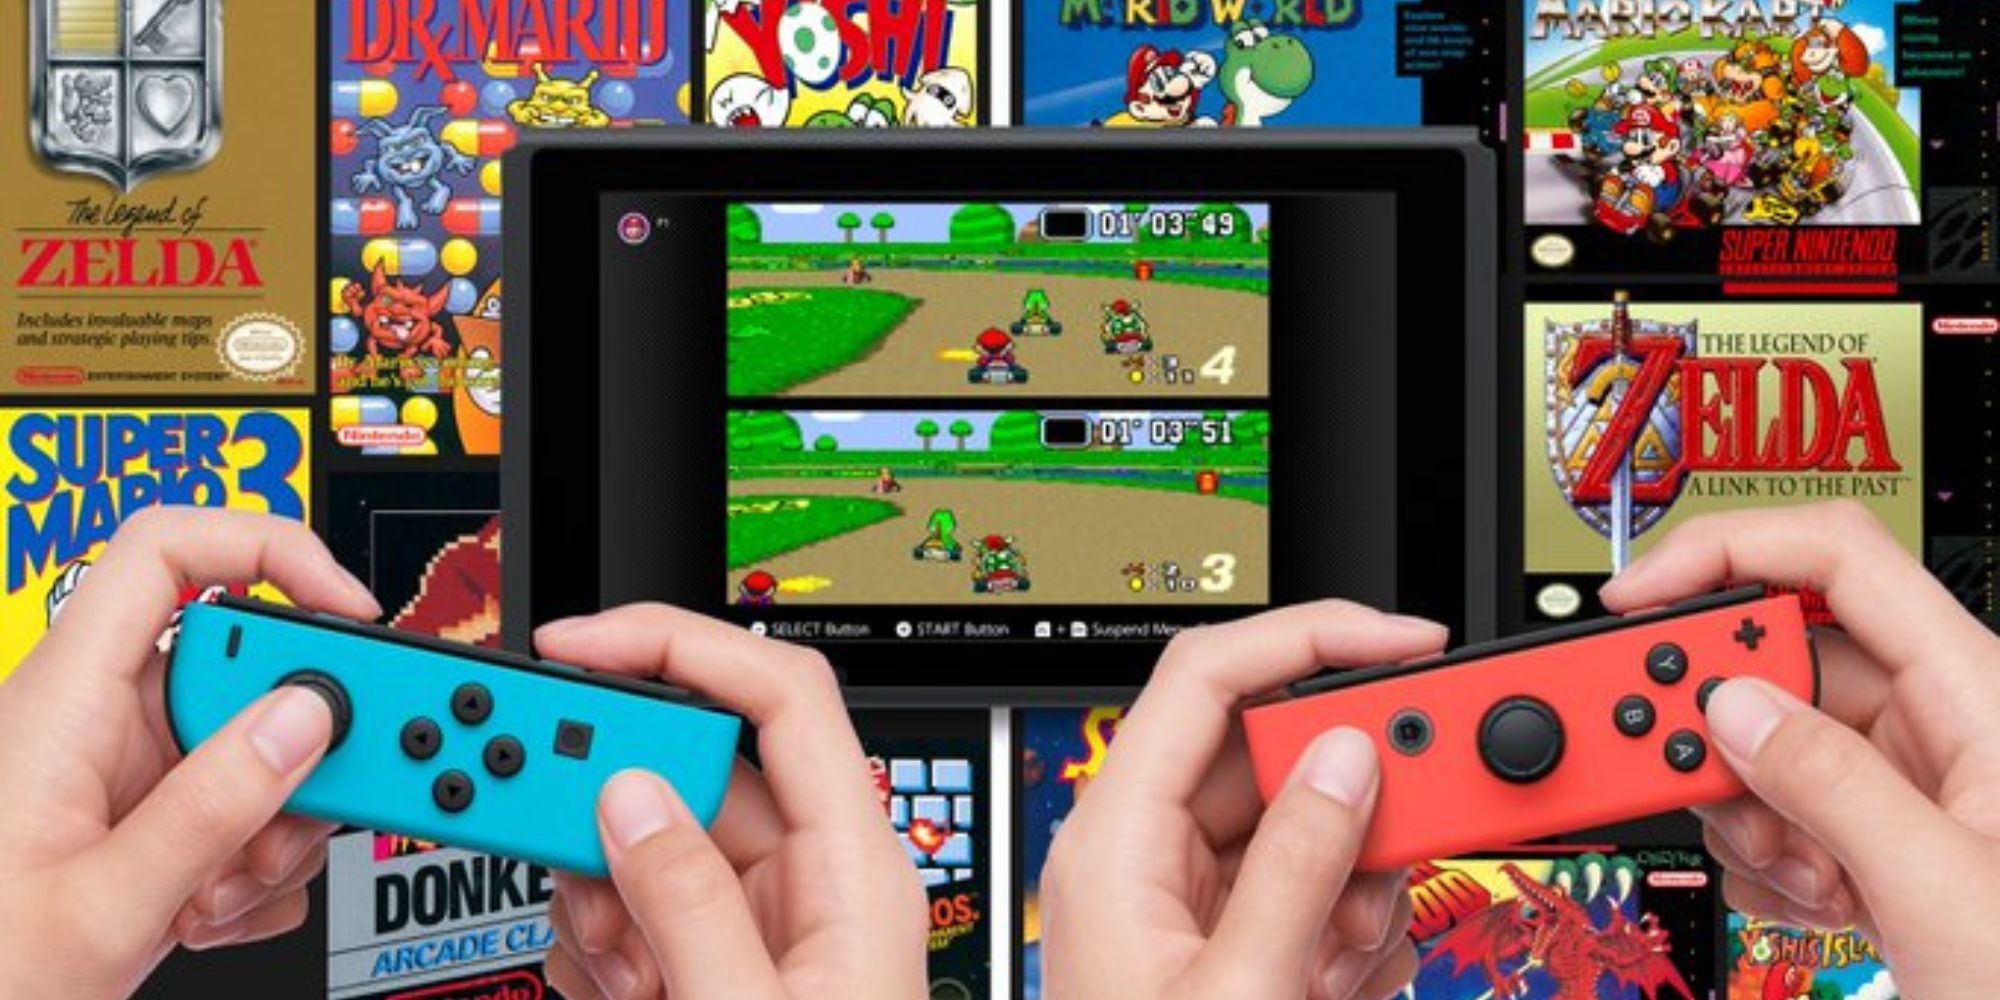 Two hands hold Joy-Cons while playing Super Mario Kart on Nintendo Switch Online